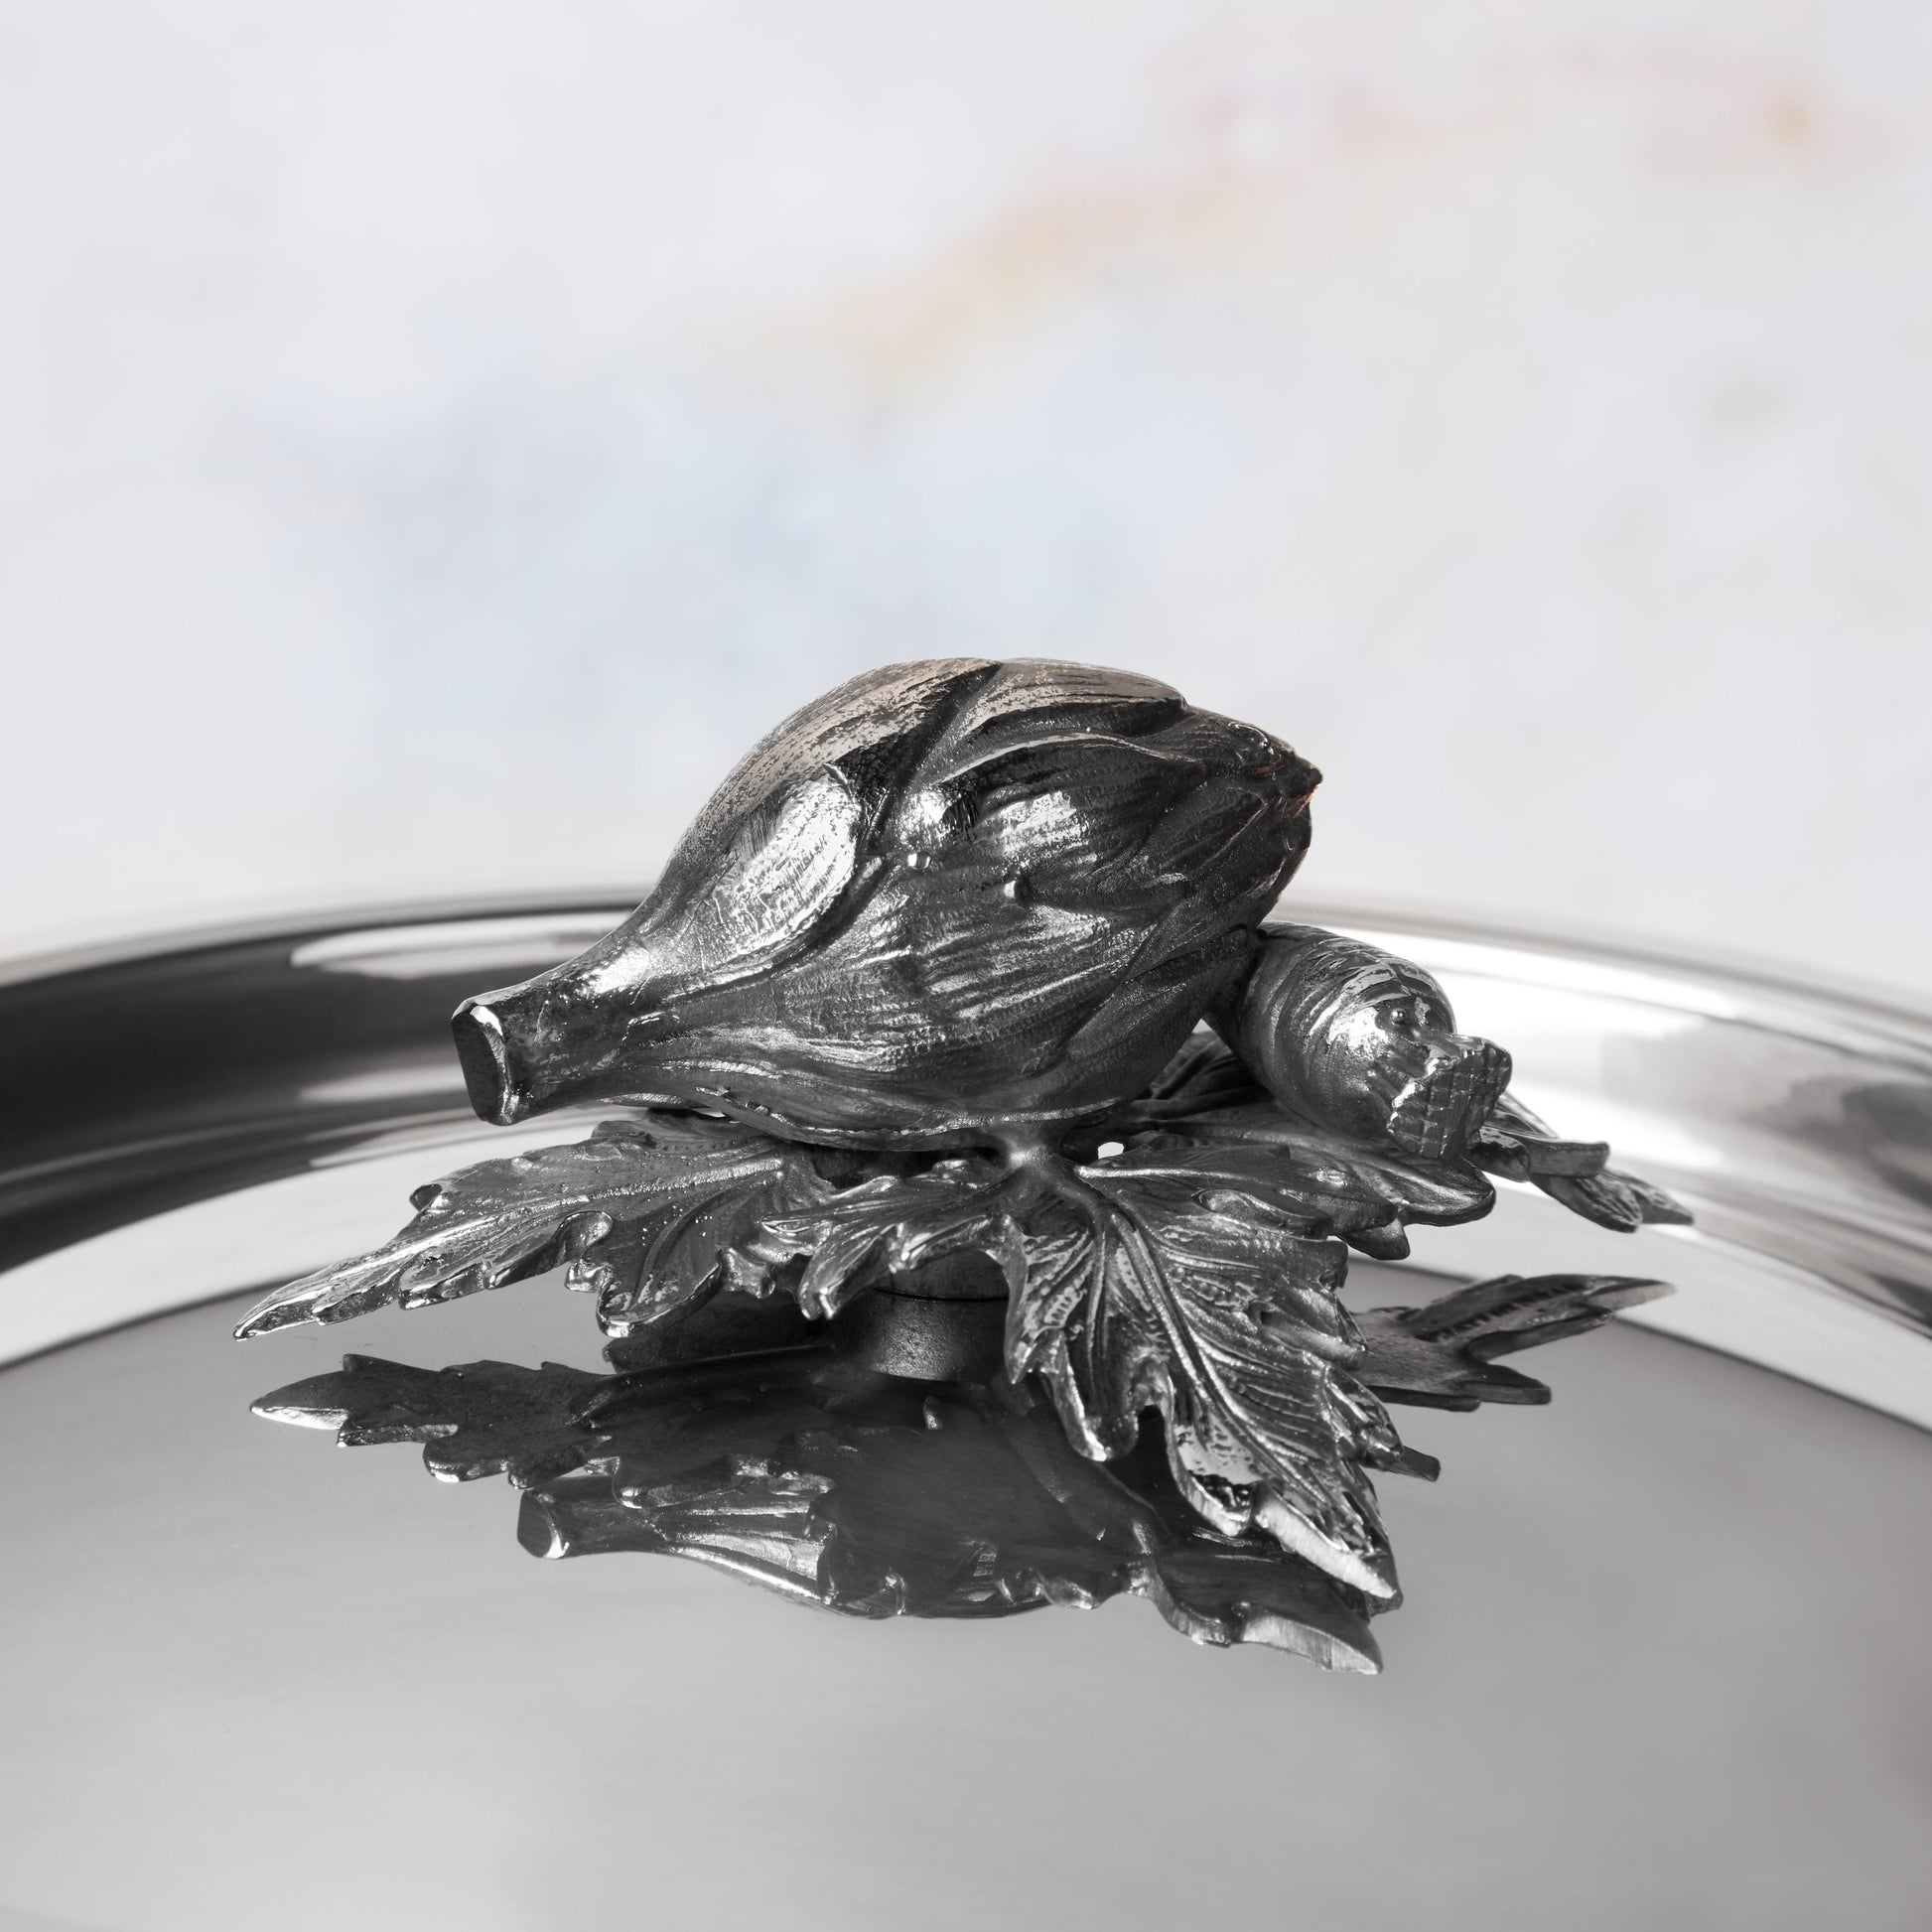 Decorated knob finial representing  artichoke  and carrot, cast in solid bronze and silver plated, on Opus Prima stainless steel lid by Ruffoni